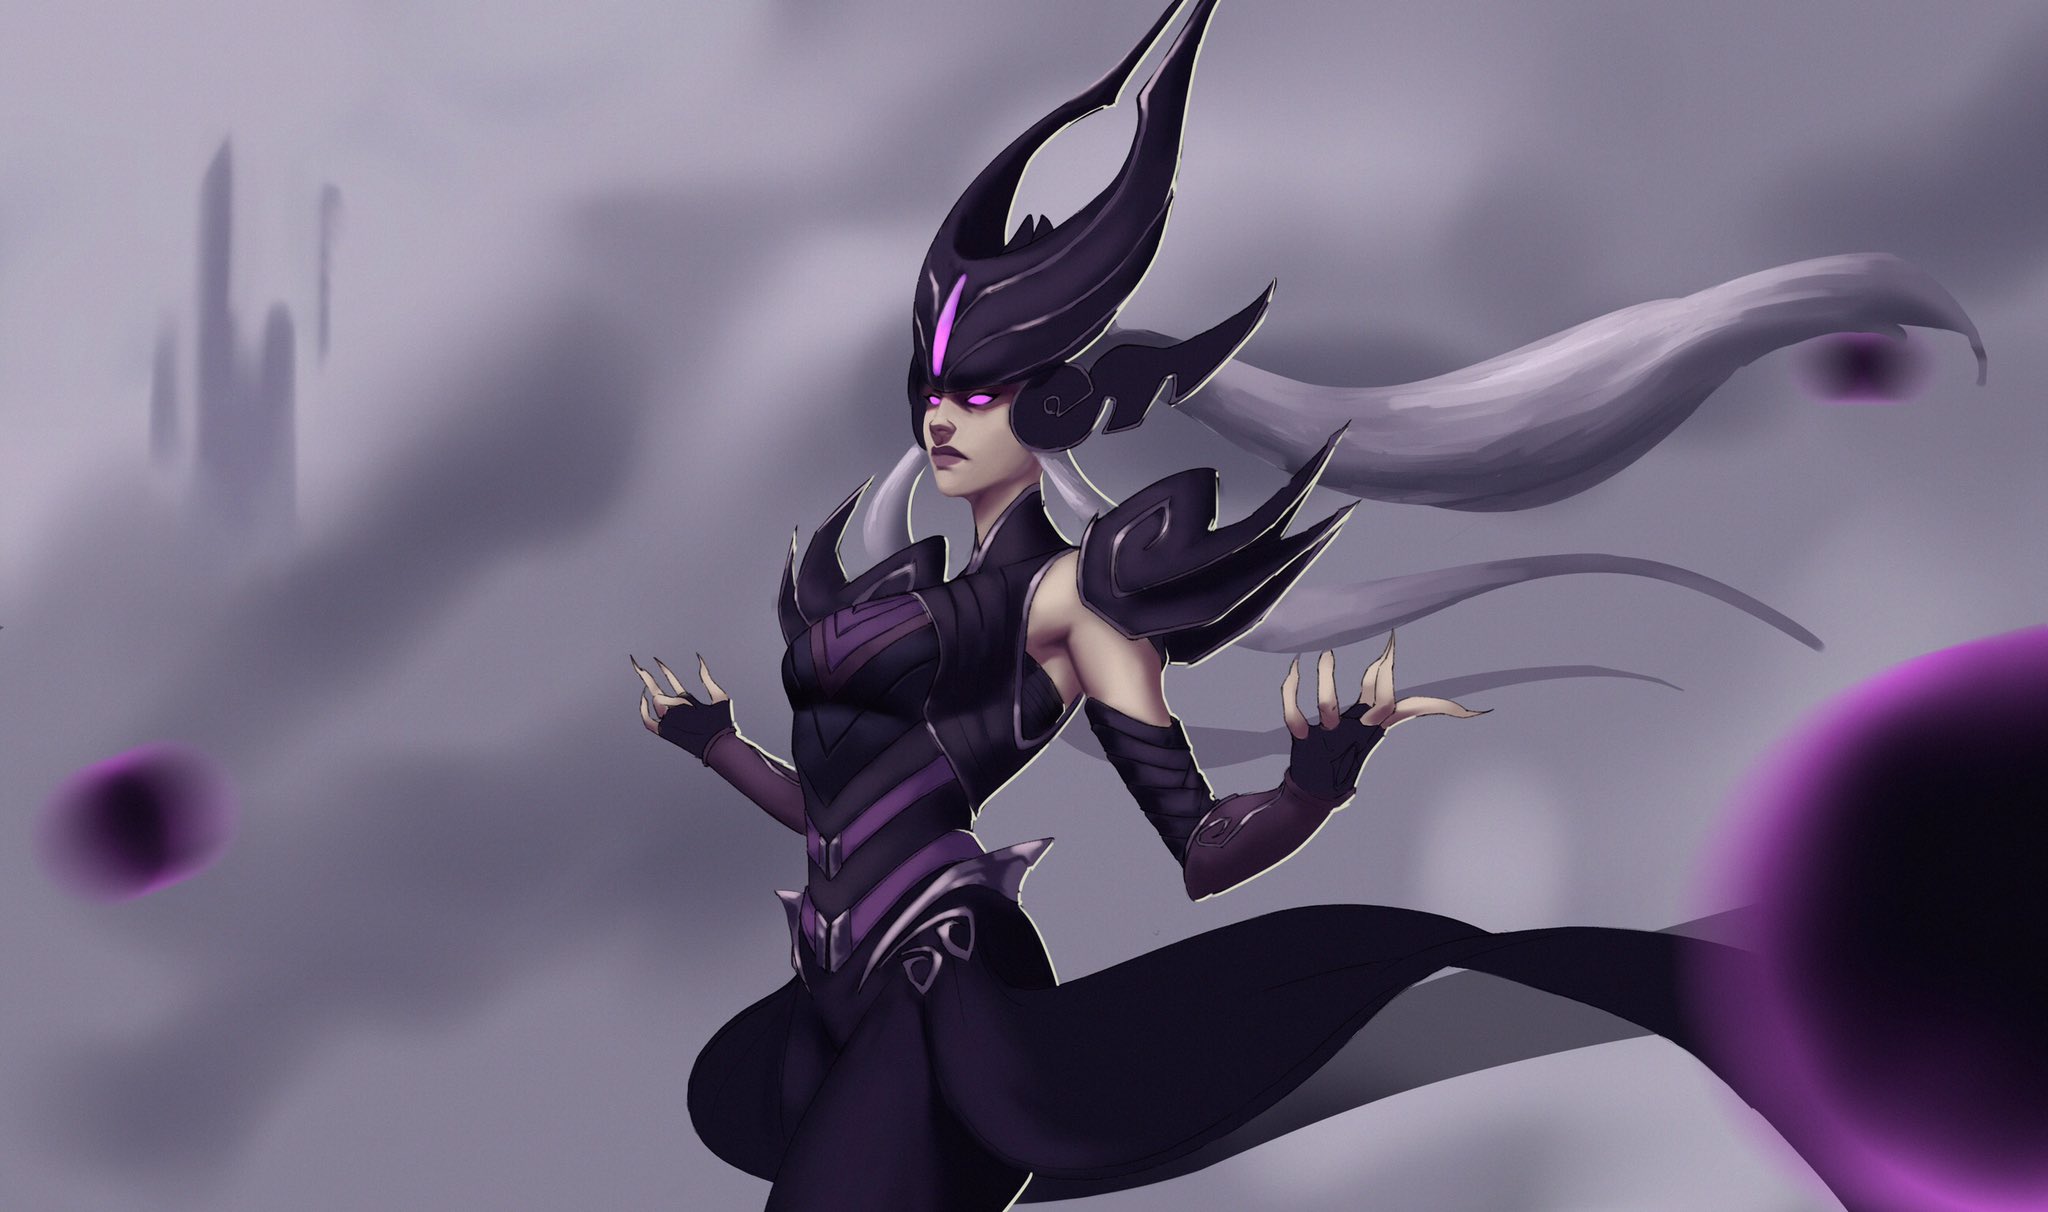 General 2048x1212 League of Legends Syndra (League of Legends) Imanol Pagola Riot Games video game characters